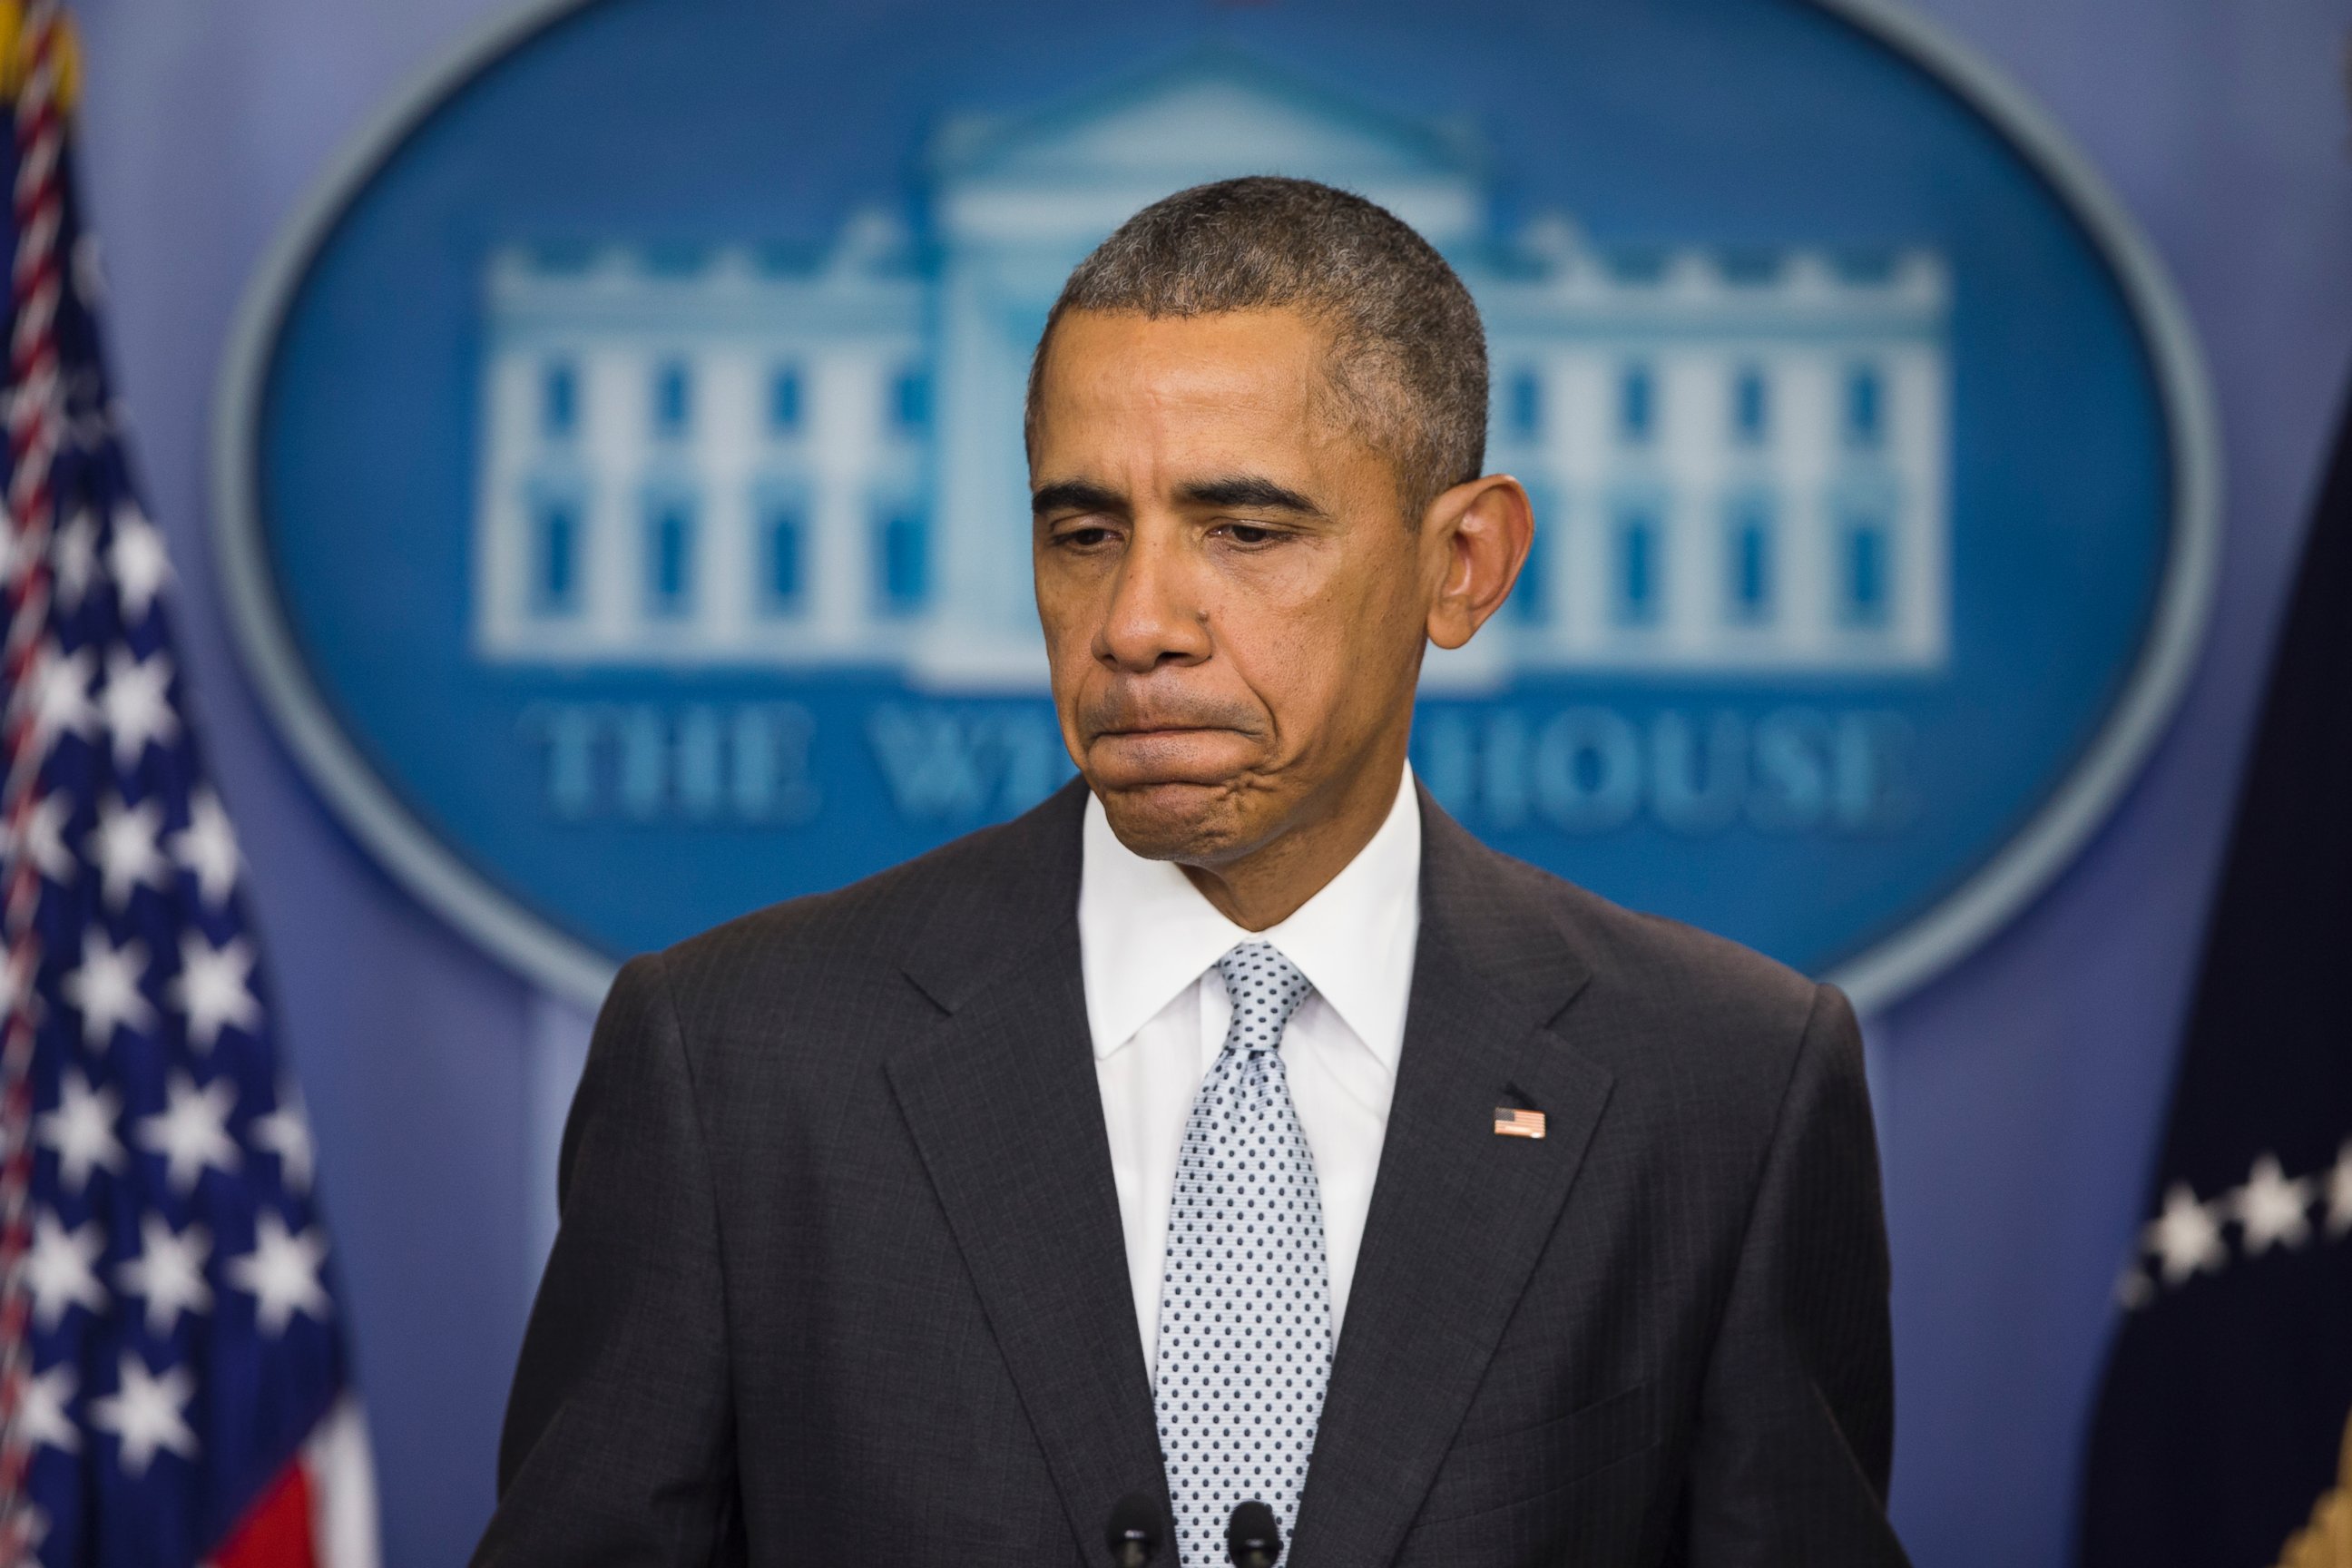 Obama Heartbreaking Paris Terror Is Attack On All of Humanity picture pic